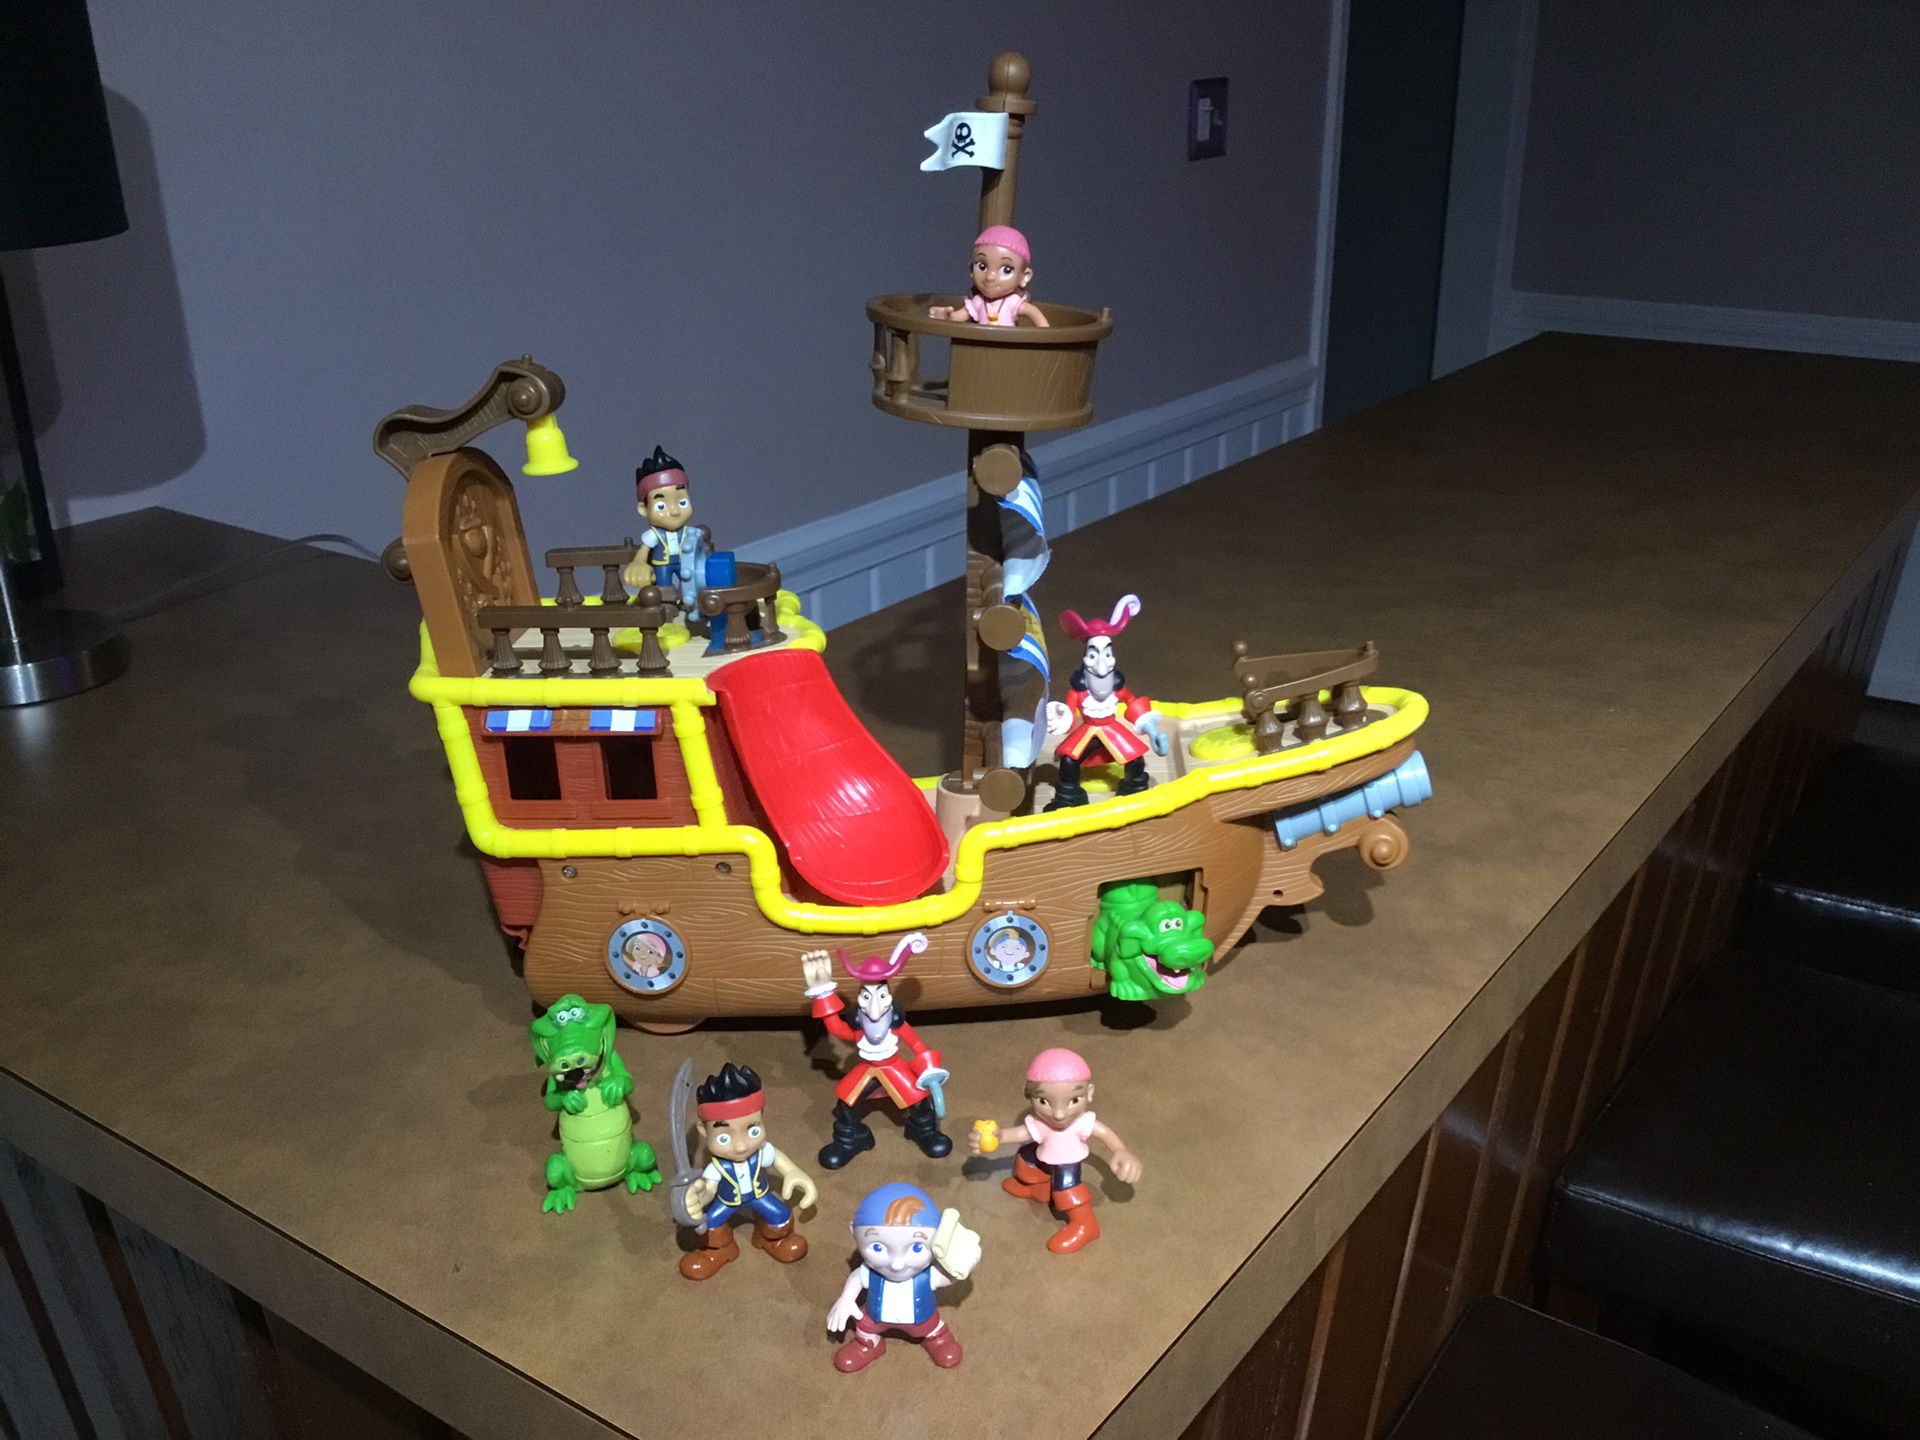 Jake and the Neverland Pirates Musical Pirate Ship Bucky - Collectable, with figures